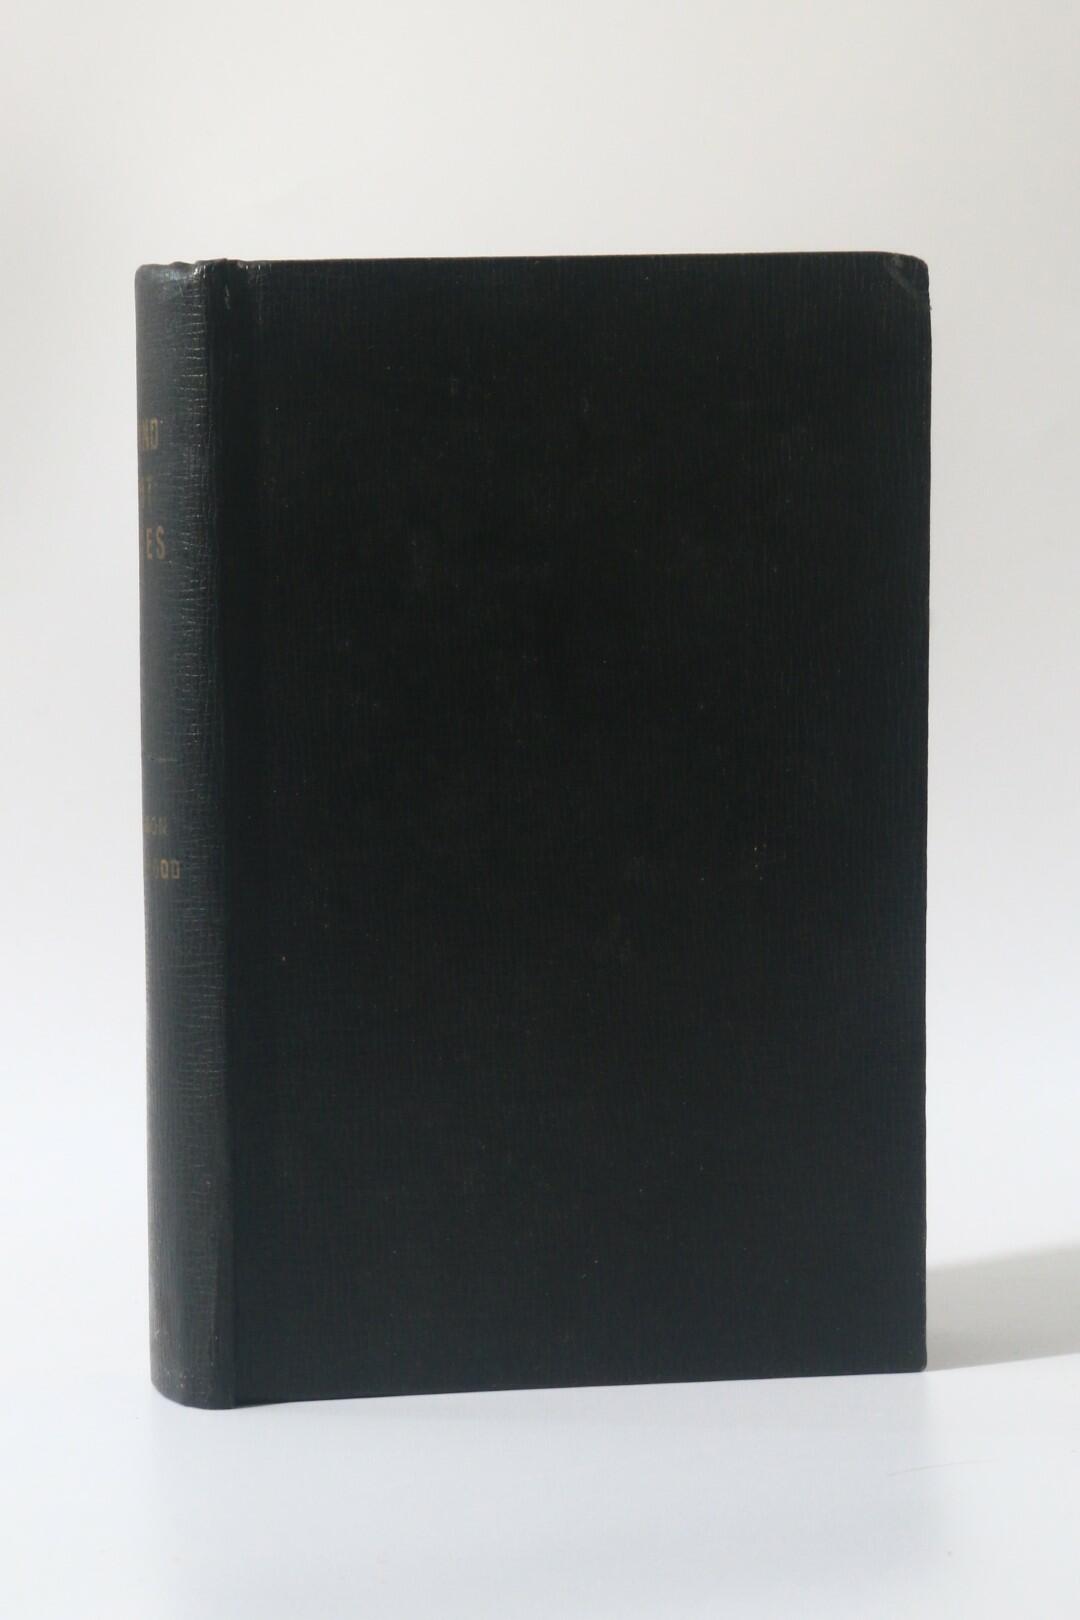 Algernon Blackwood - Day and Night Stories - Cassell, 1917, First Edition.